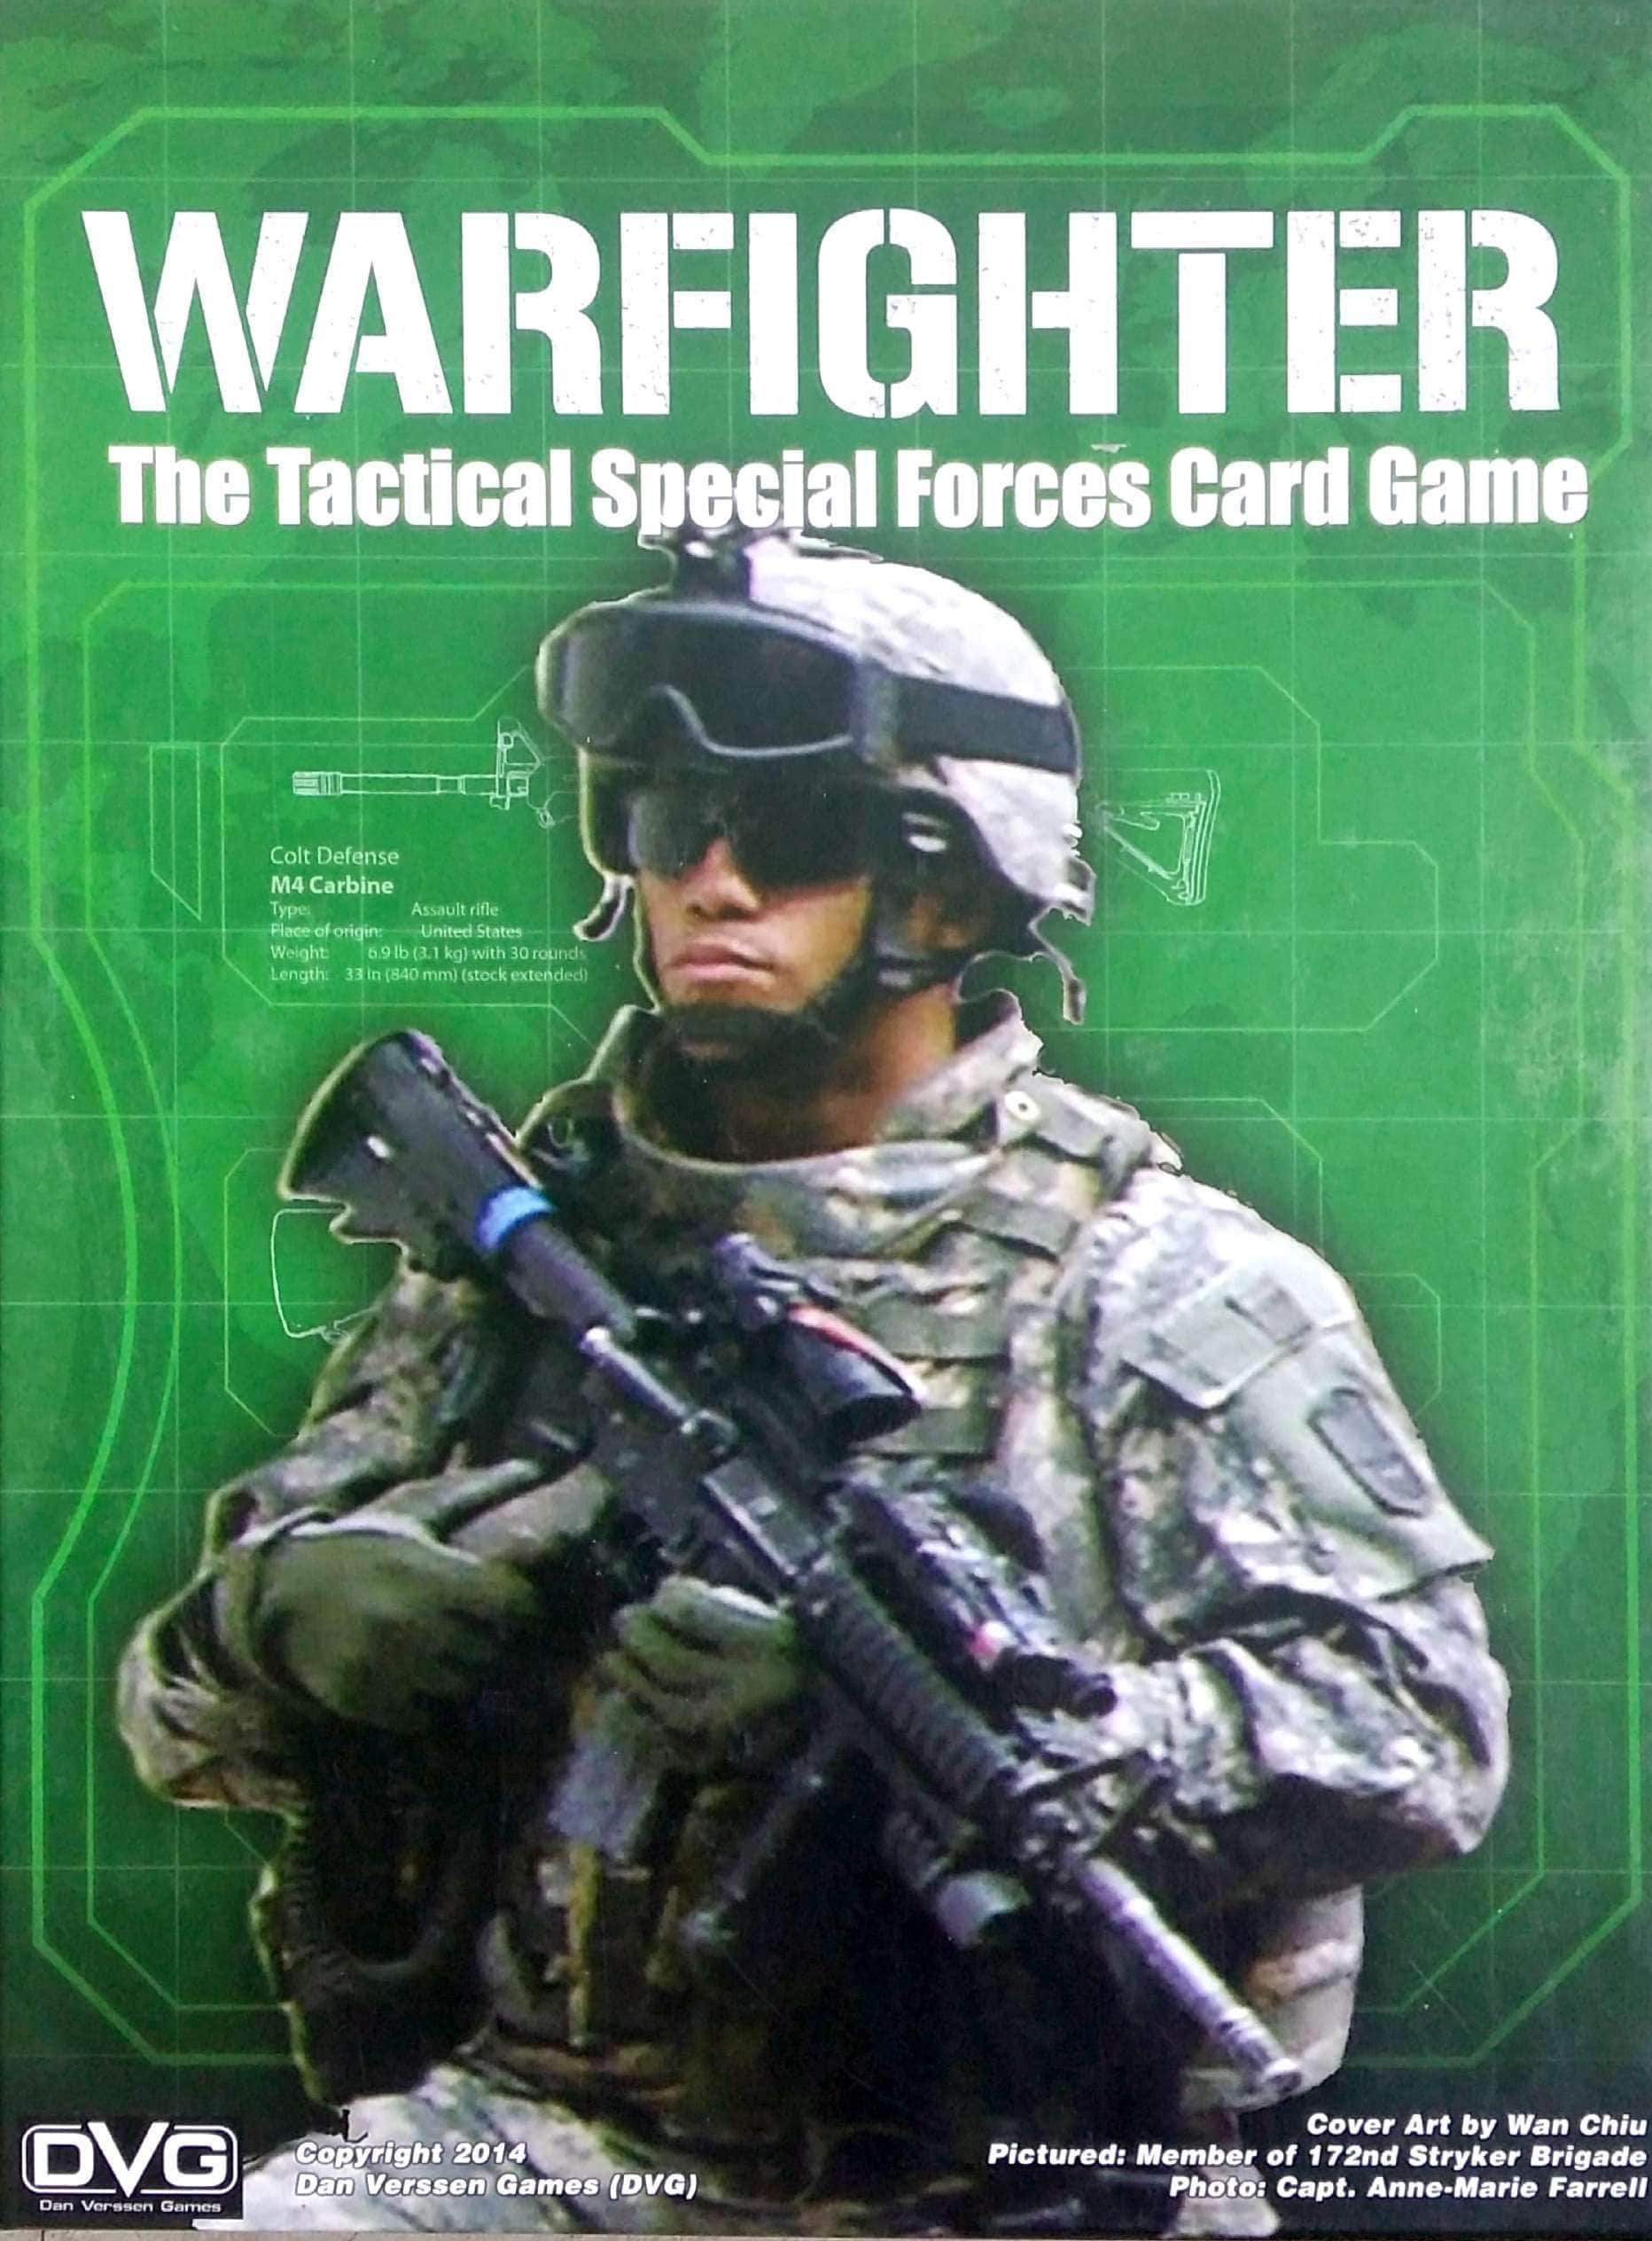 Warfighter: The Tactical Special Forces Card Game (Kickstarter Special) Kickstarter Game Dan Verssen Games (DVG) KS800088A